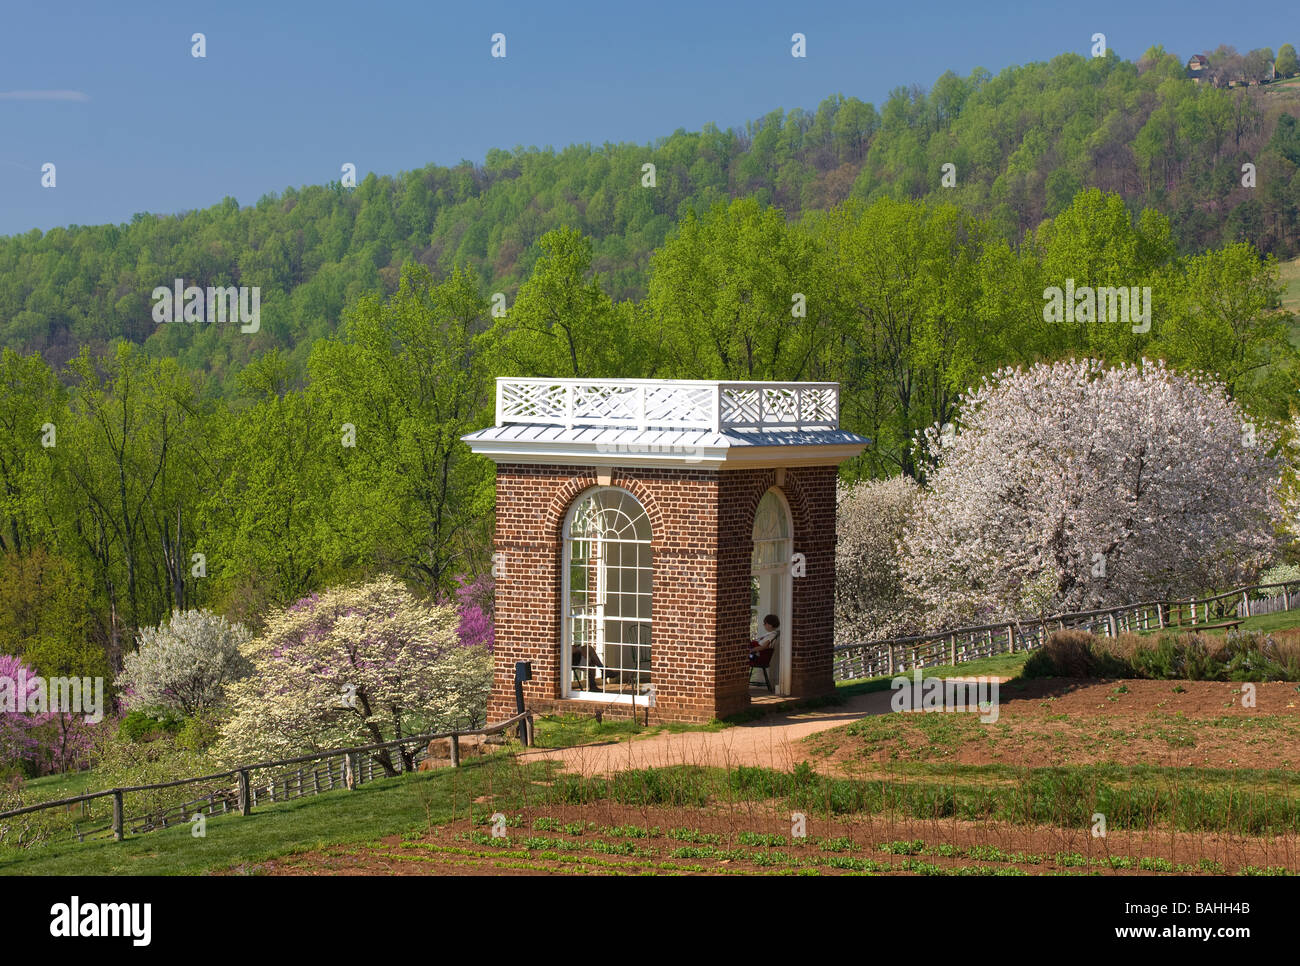 The United States 3rd president Thomas Jefferson built his home Monticello in the foothills of Albemarle County, Virginia. Stock Photo